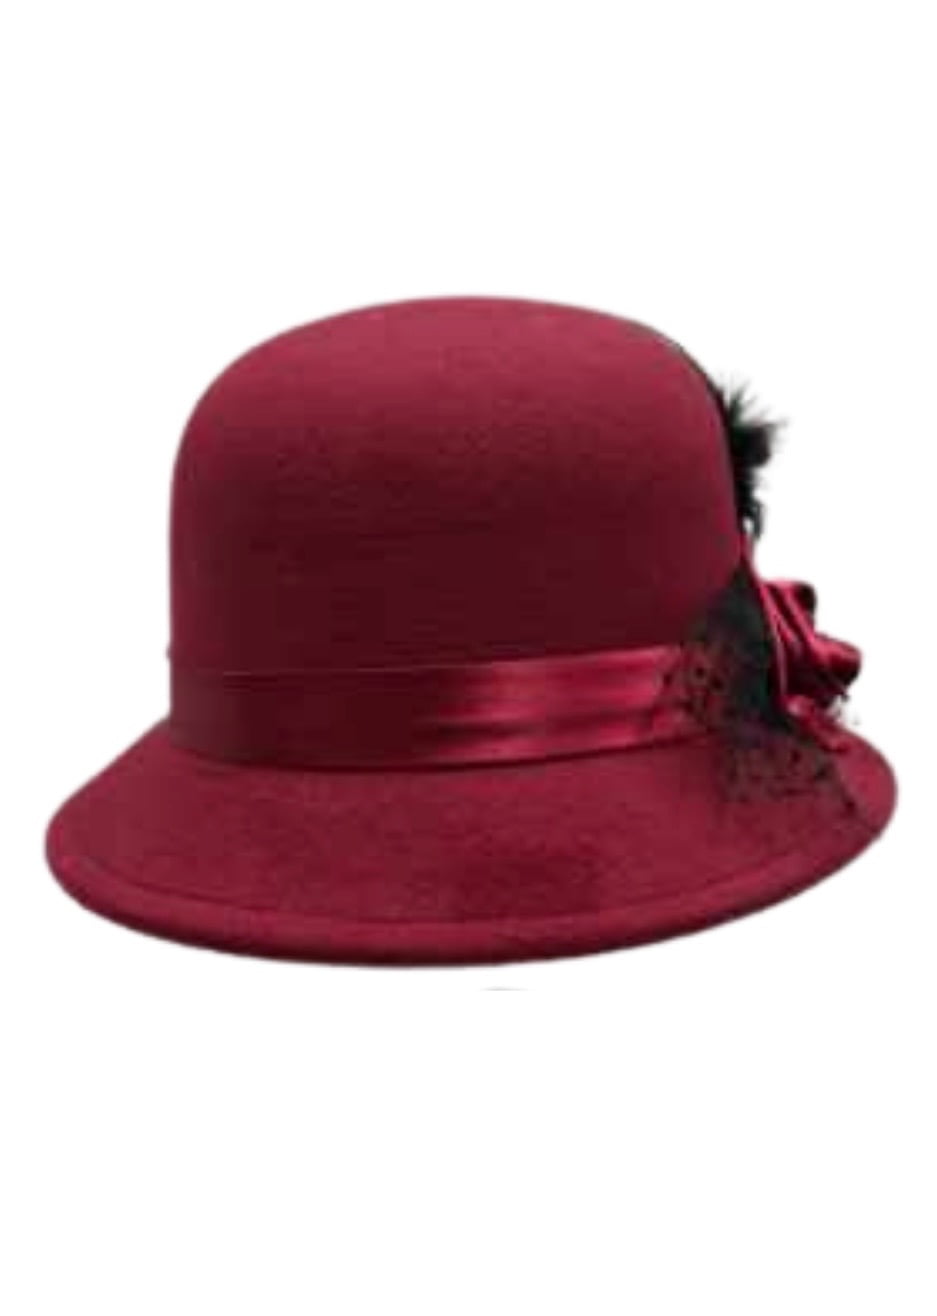 Featured image for “1920’s Hat”